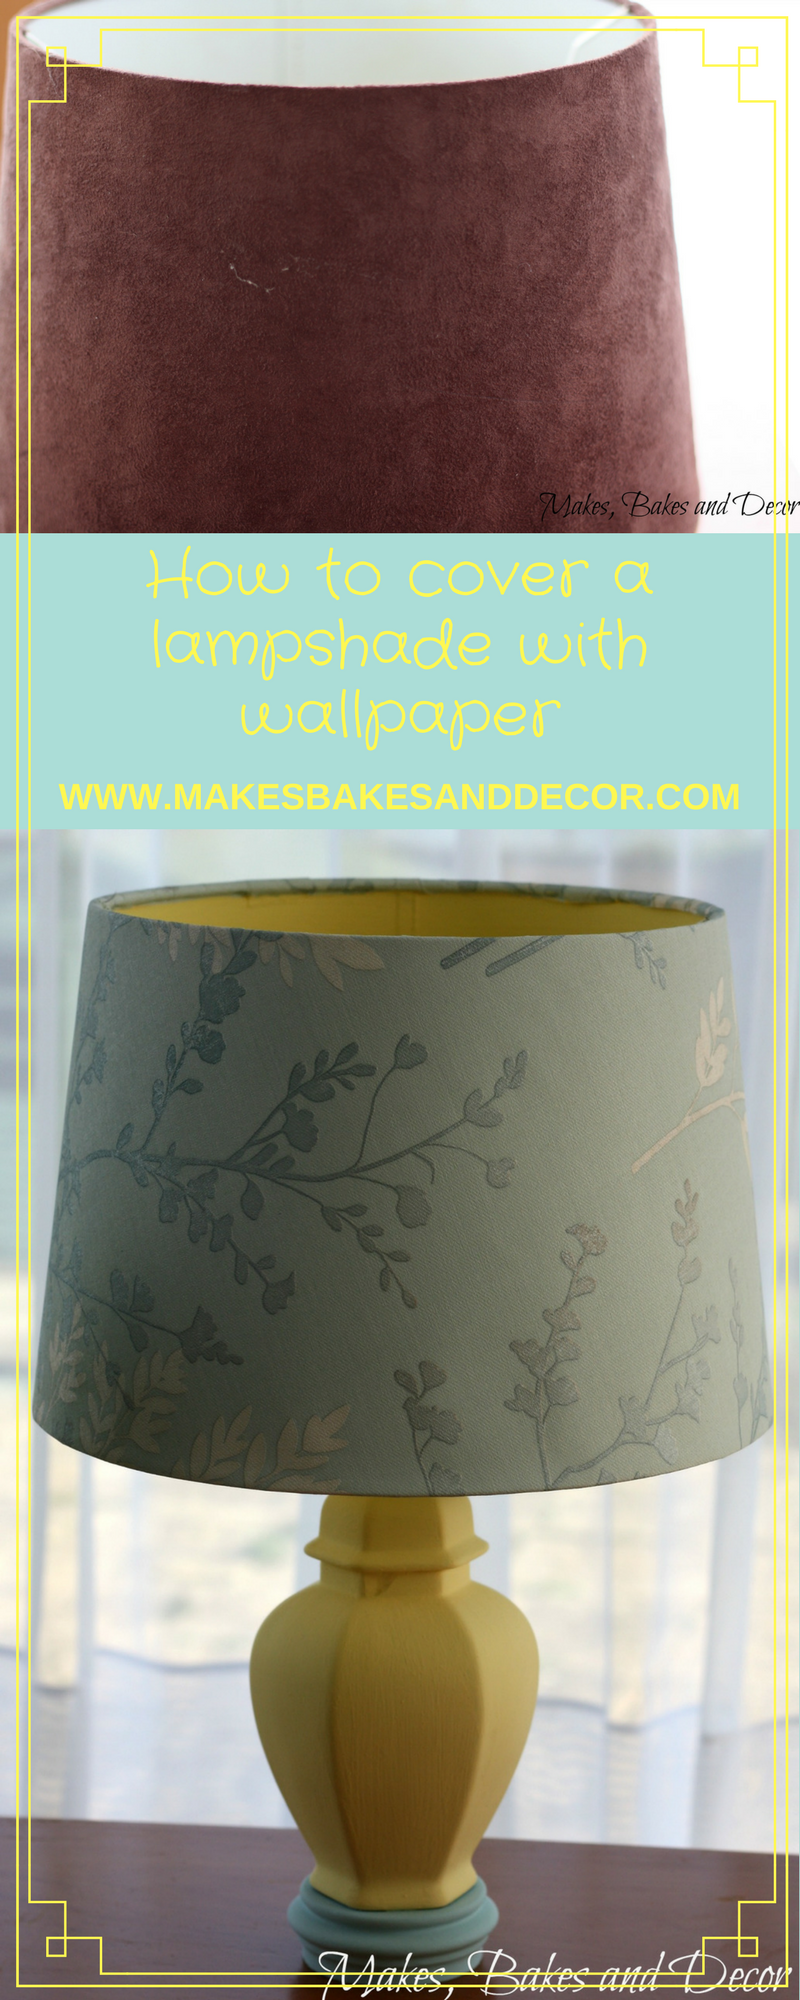 How To Cover A Lampshade With Wallpaper, Can You Make A Lampshade With Wallpaper